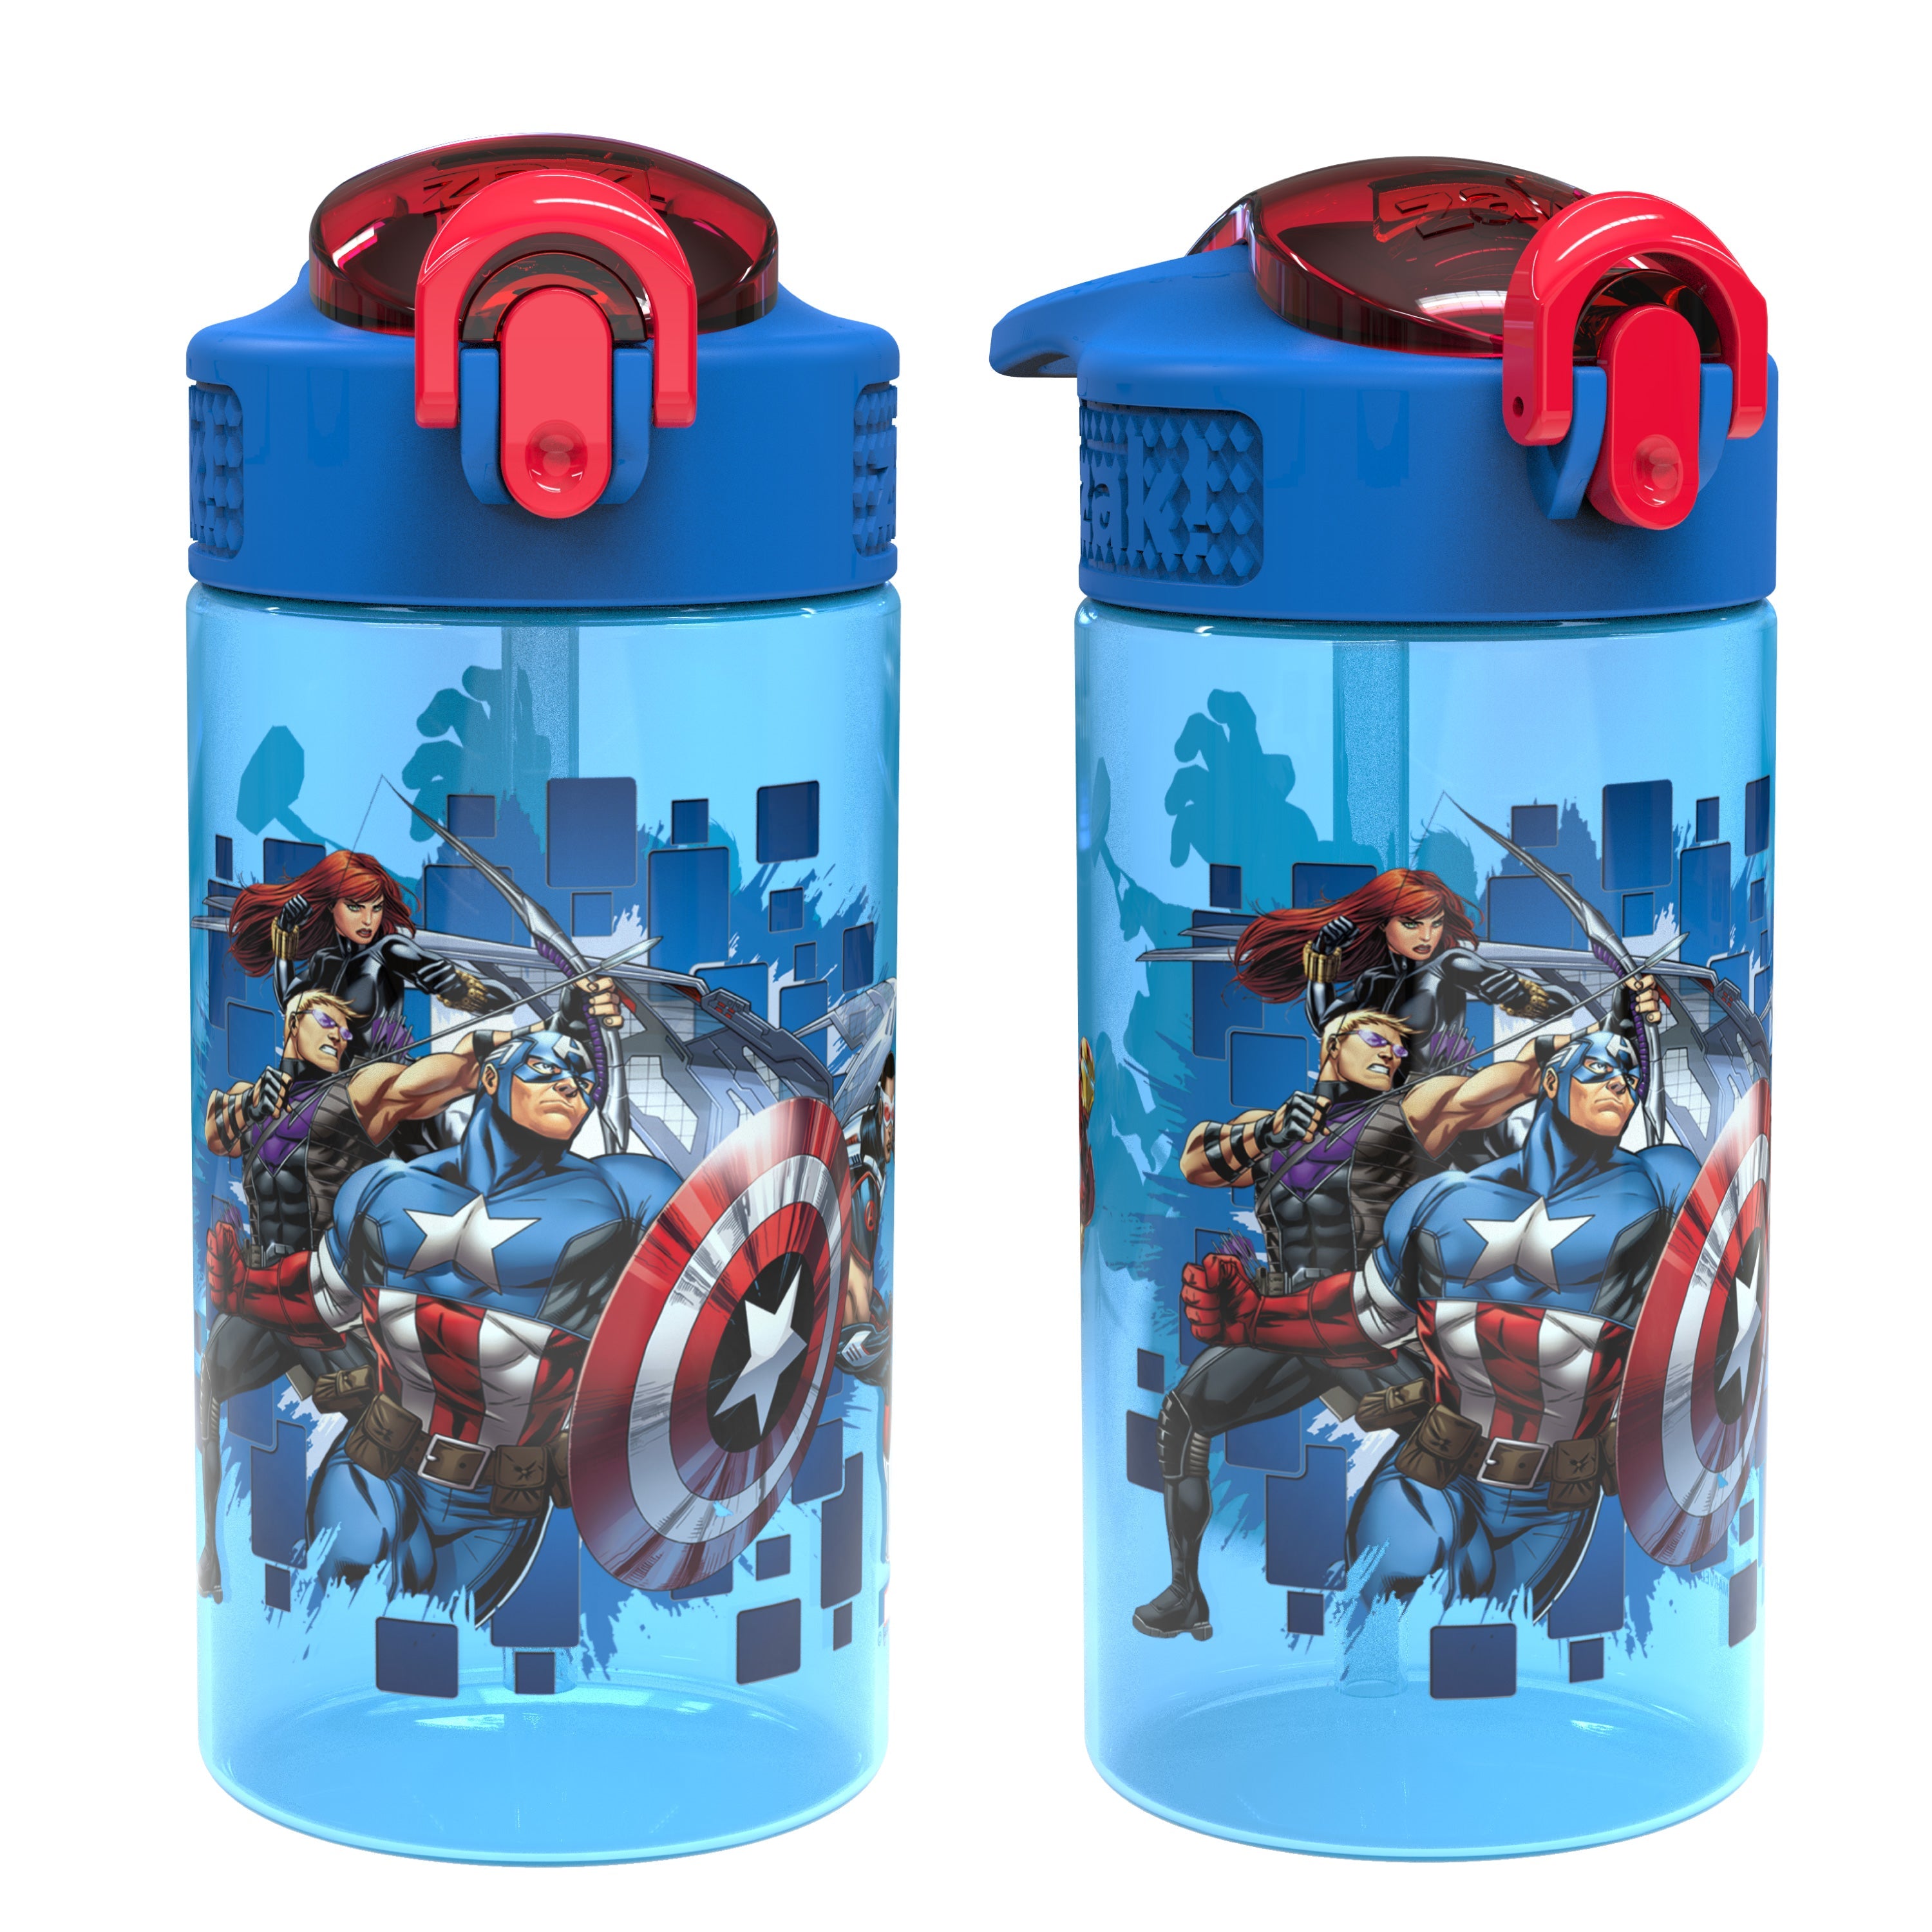 Zak Designs Kids Durable Plastic Spout Cover and Built-in Carrying Loop, Leak-Proof Water Design for Travel, (16oz, 2pc Set), Marvel Avengers